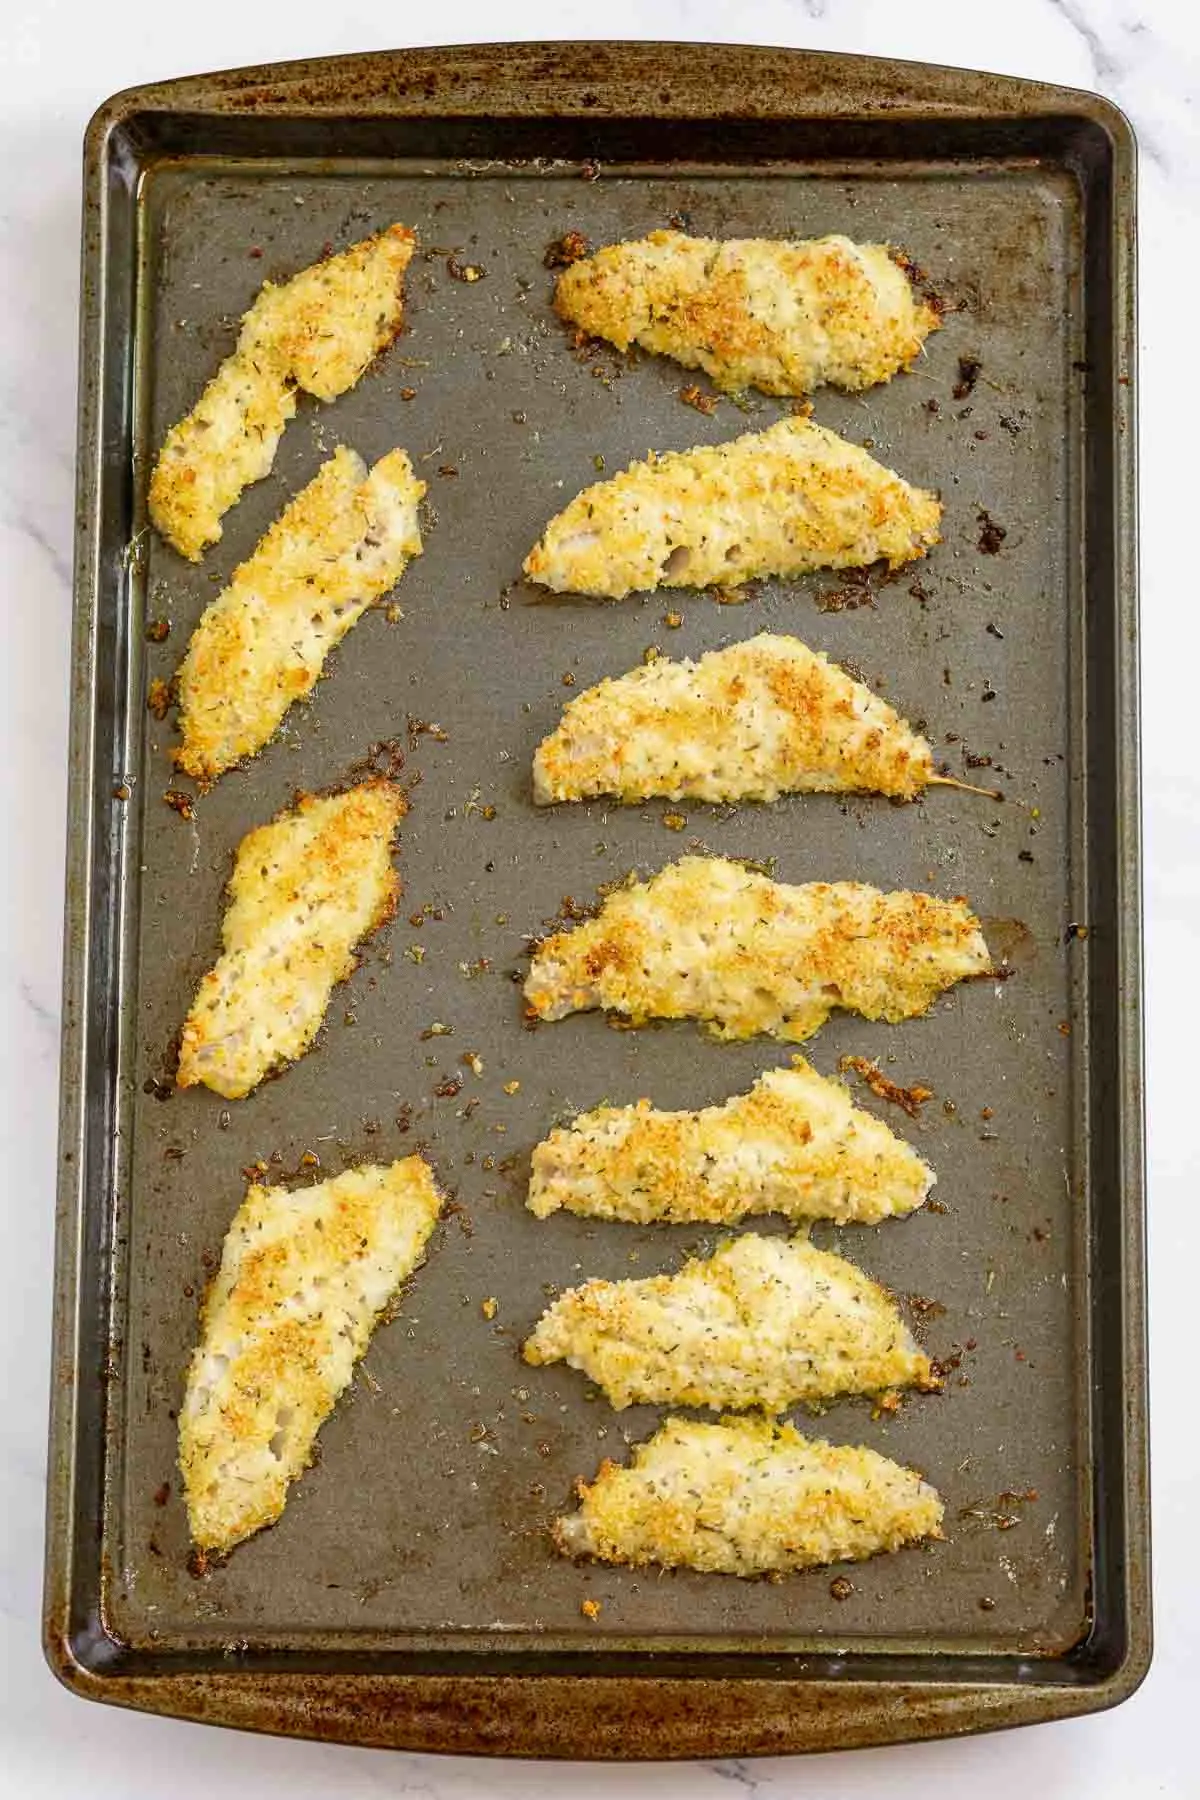 Baking sheet with baked perch fillets